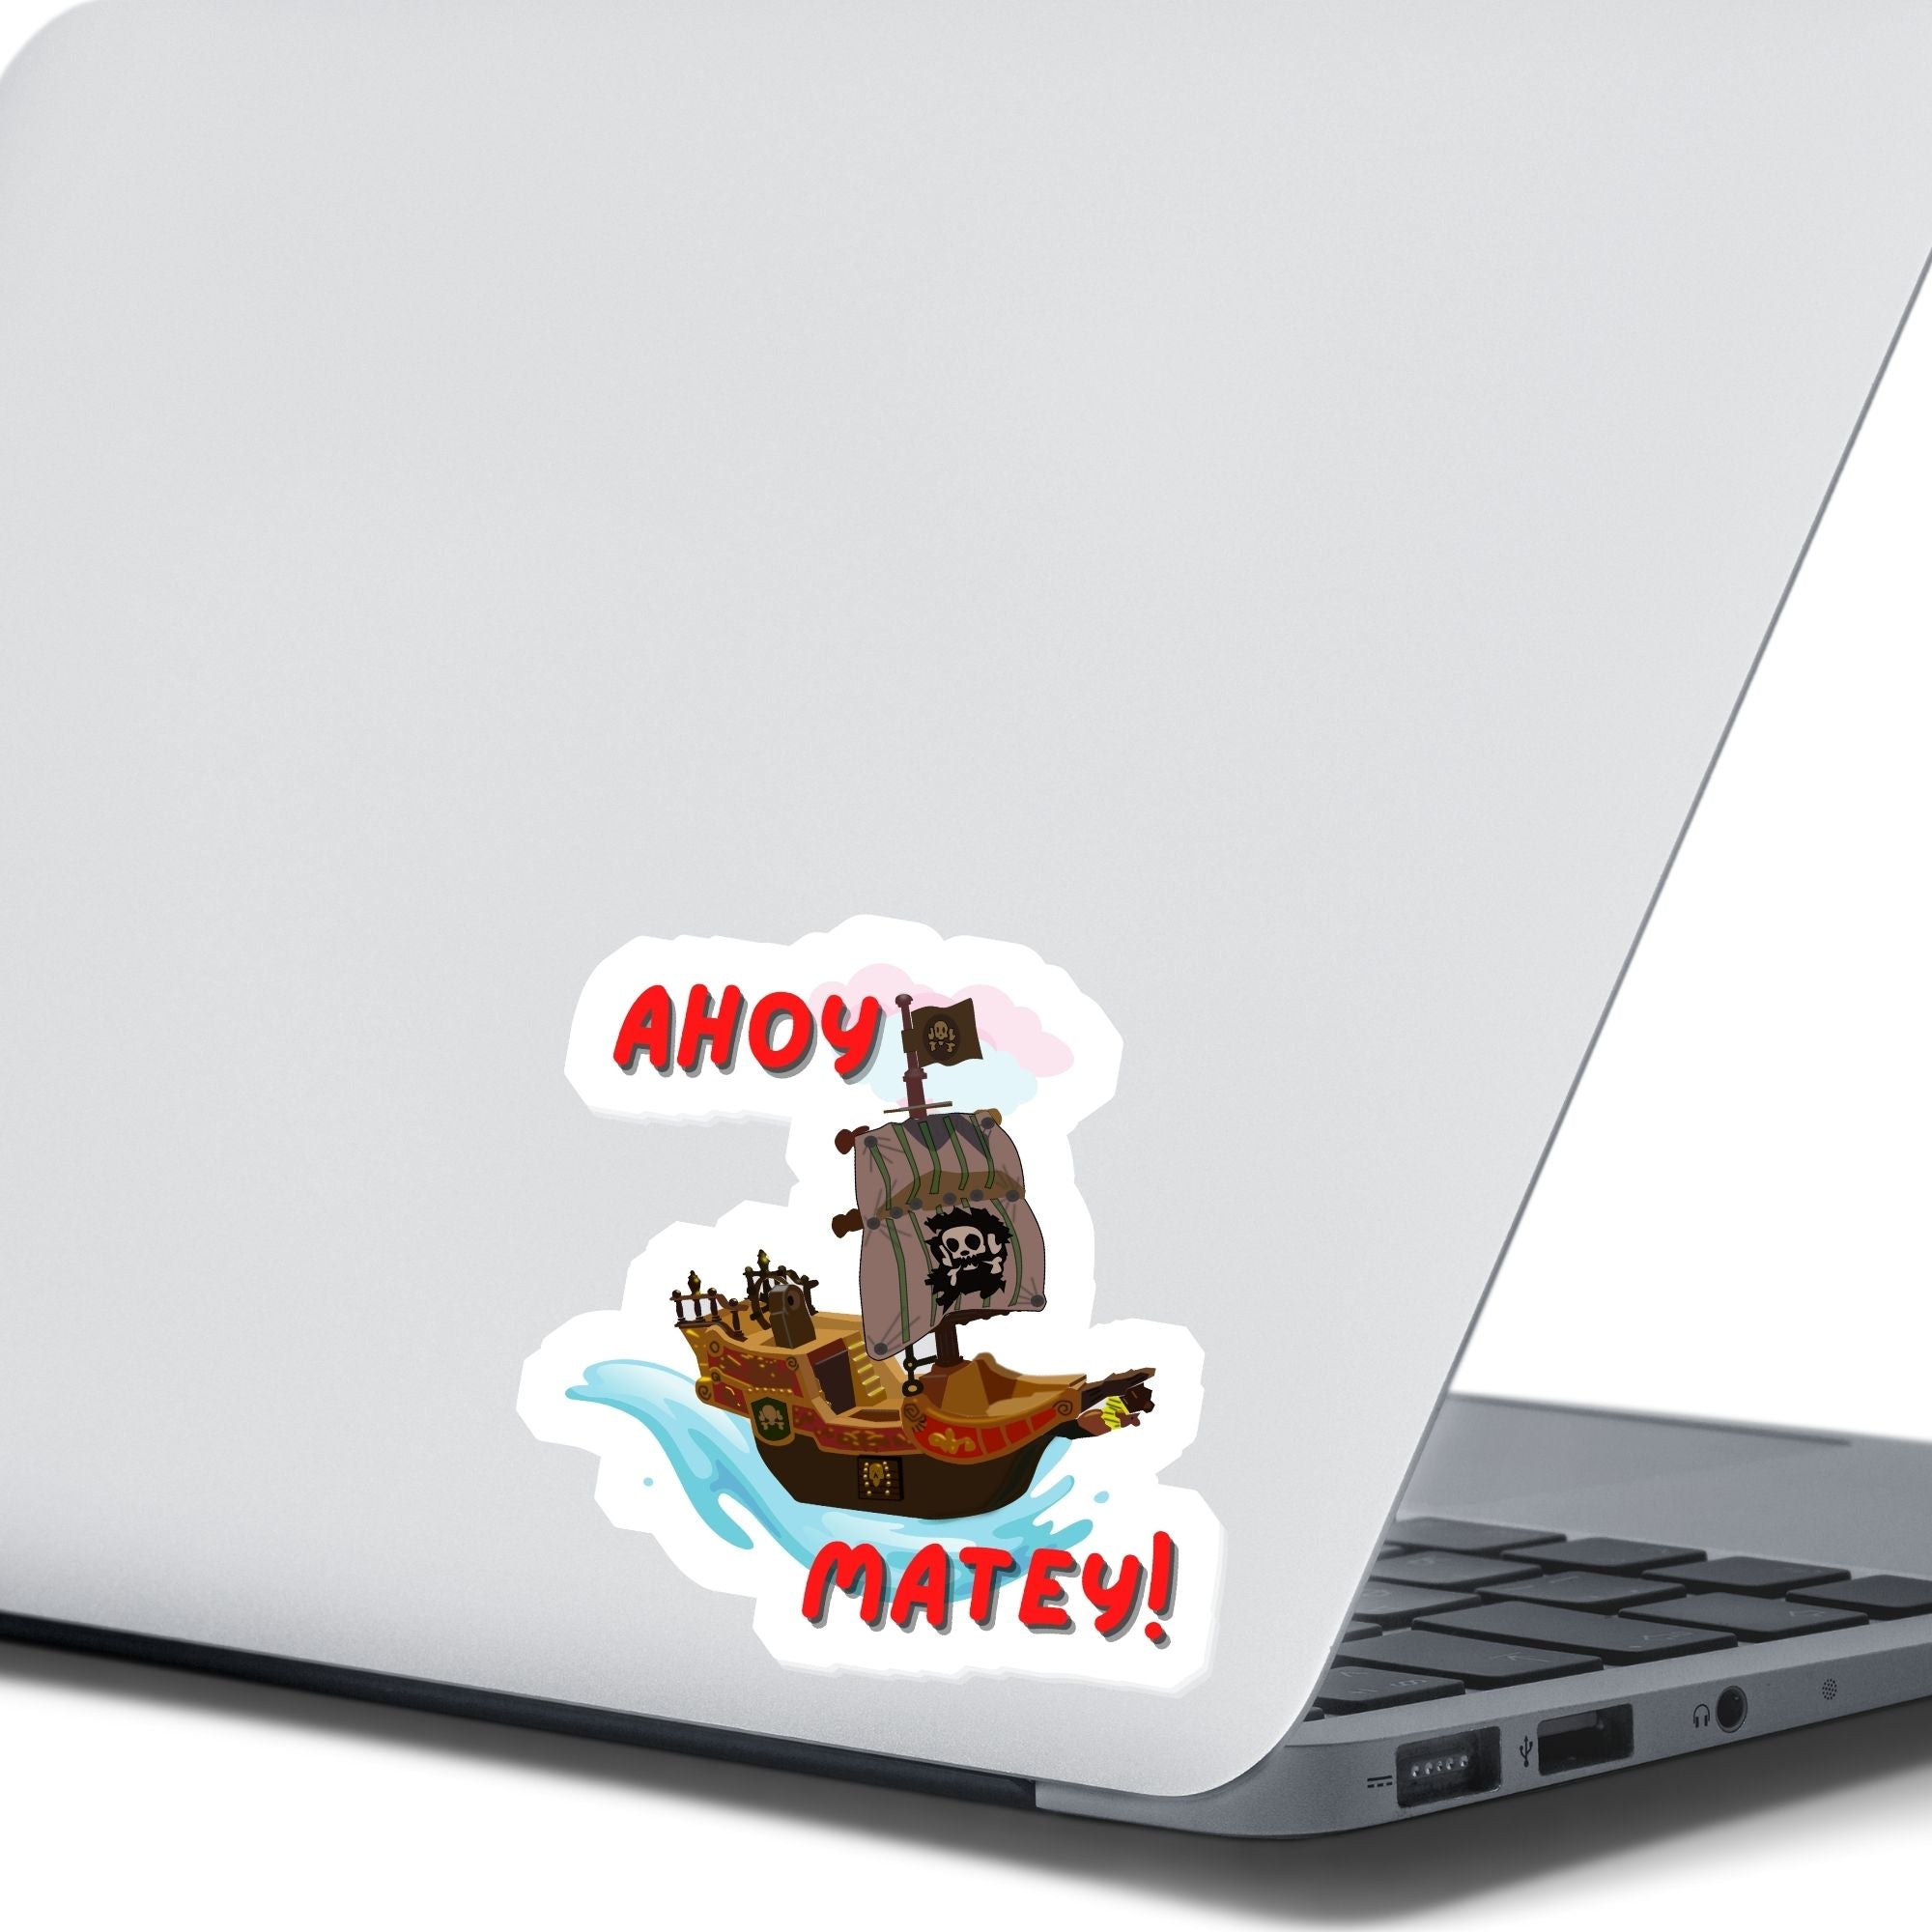 Hoist the main and prepare to board! This individual die-cut sticker is of a pirate ship under sail with the words "Ahoy Matey!" This image shows the pirate ship on the back of an open laptop.